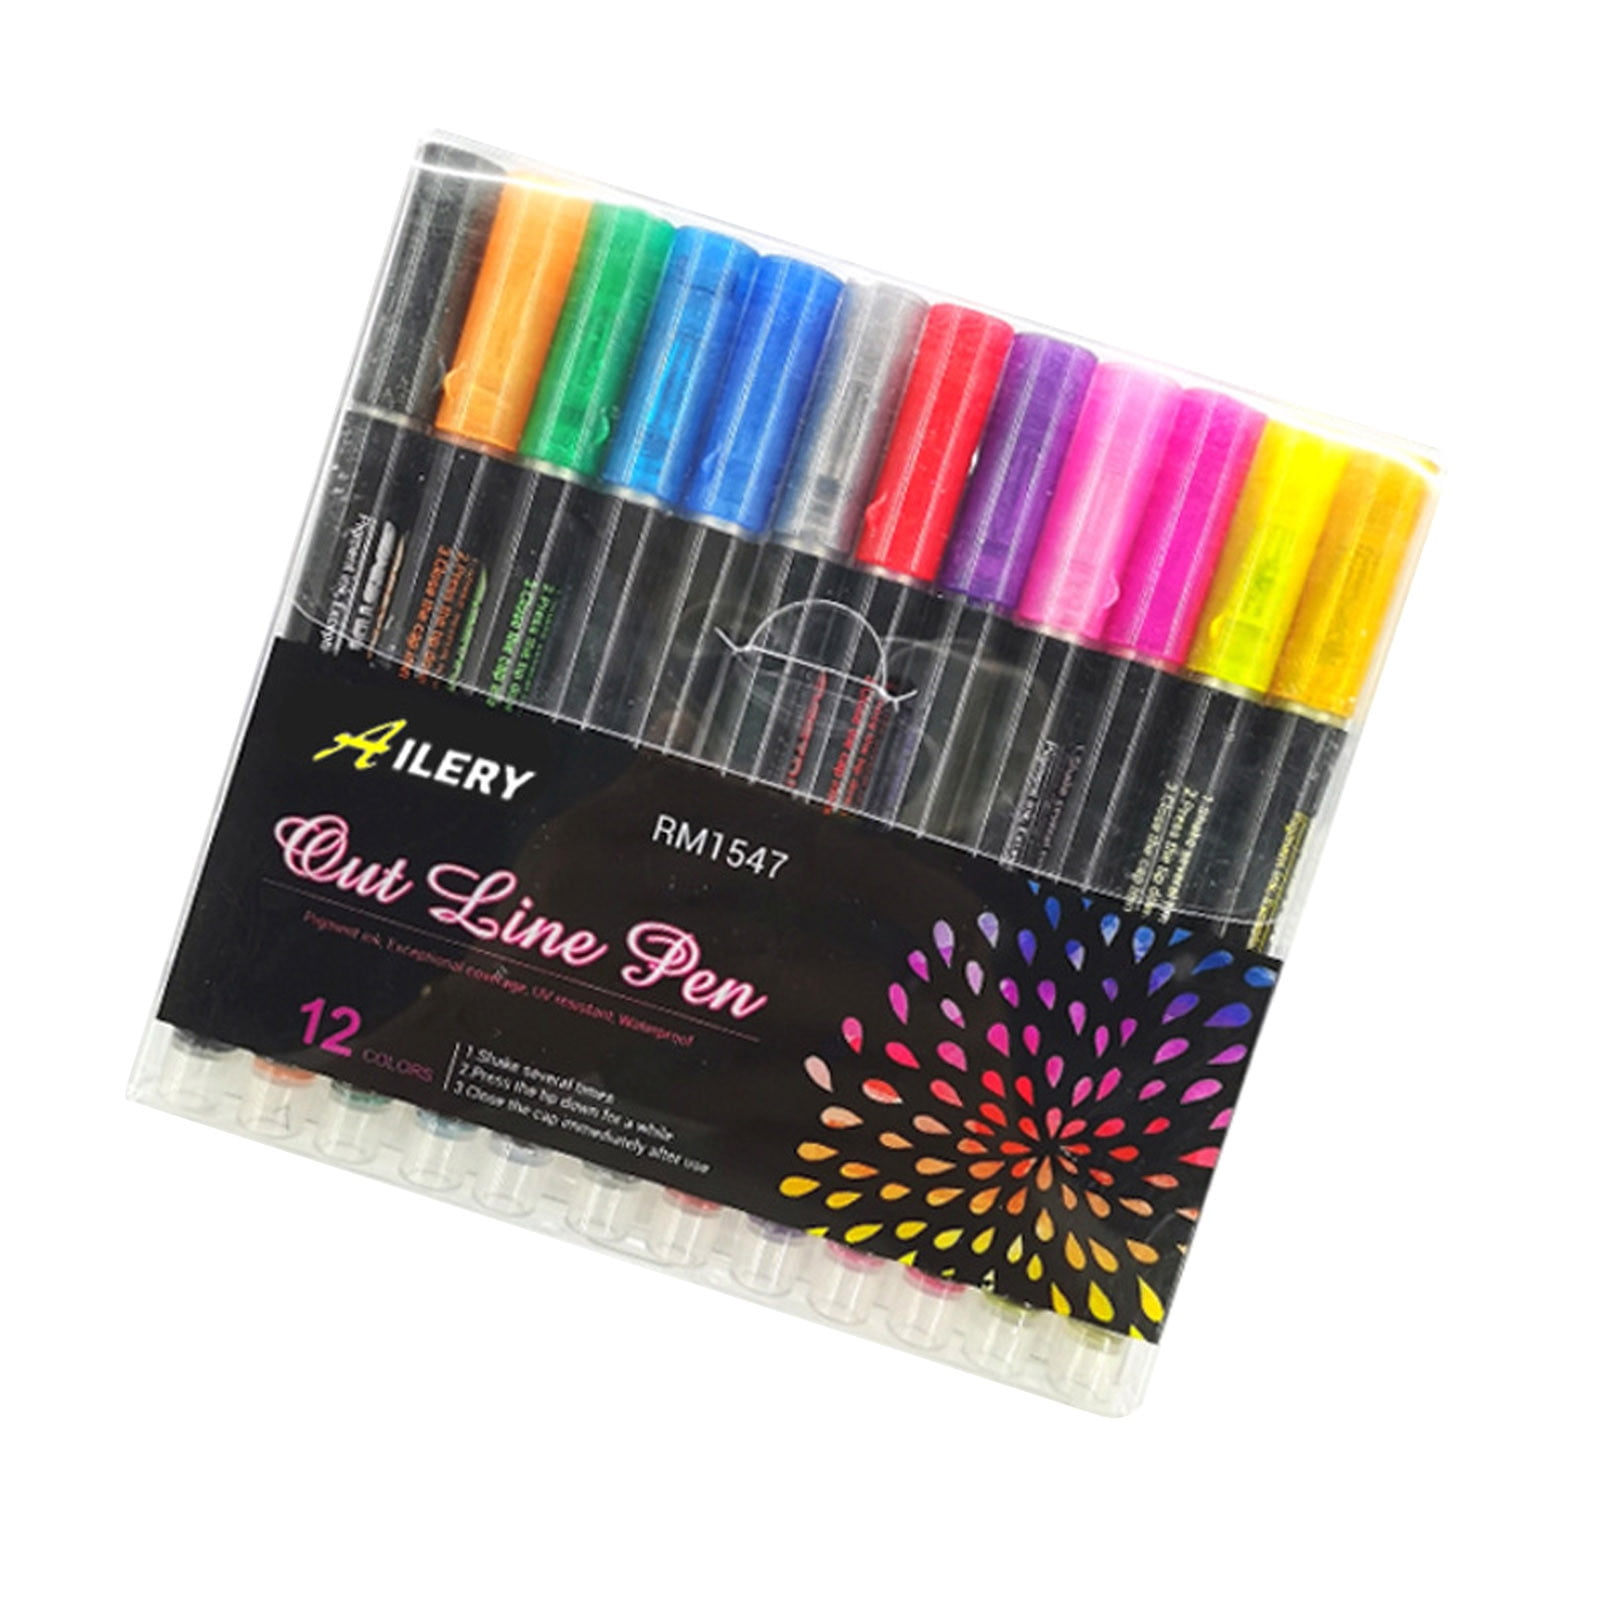 DTBPRQ Gel Pens, Colored Pencils 12 Colors Outline Markers Pens, Super  Squiggles Double Line Pen, Glitter Drawing Pens For Greeting Cards, Craft